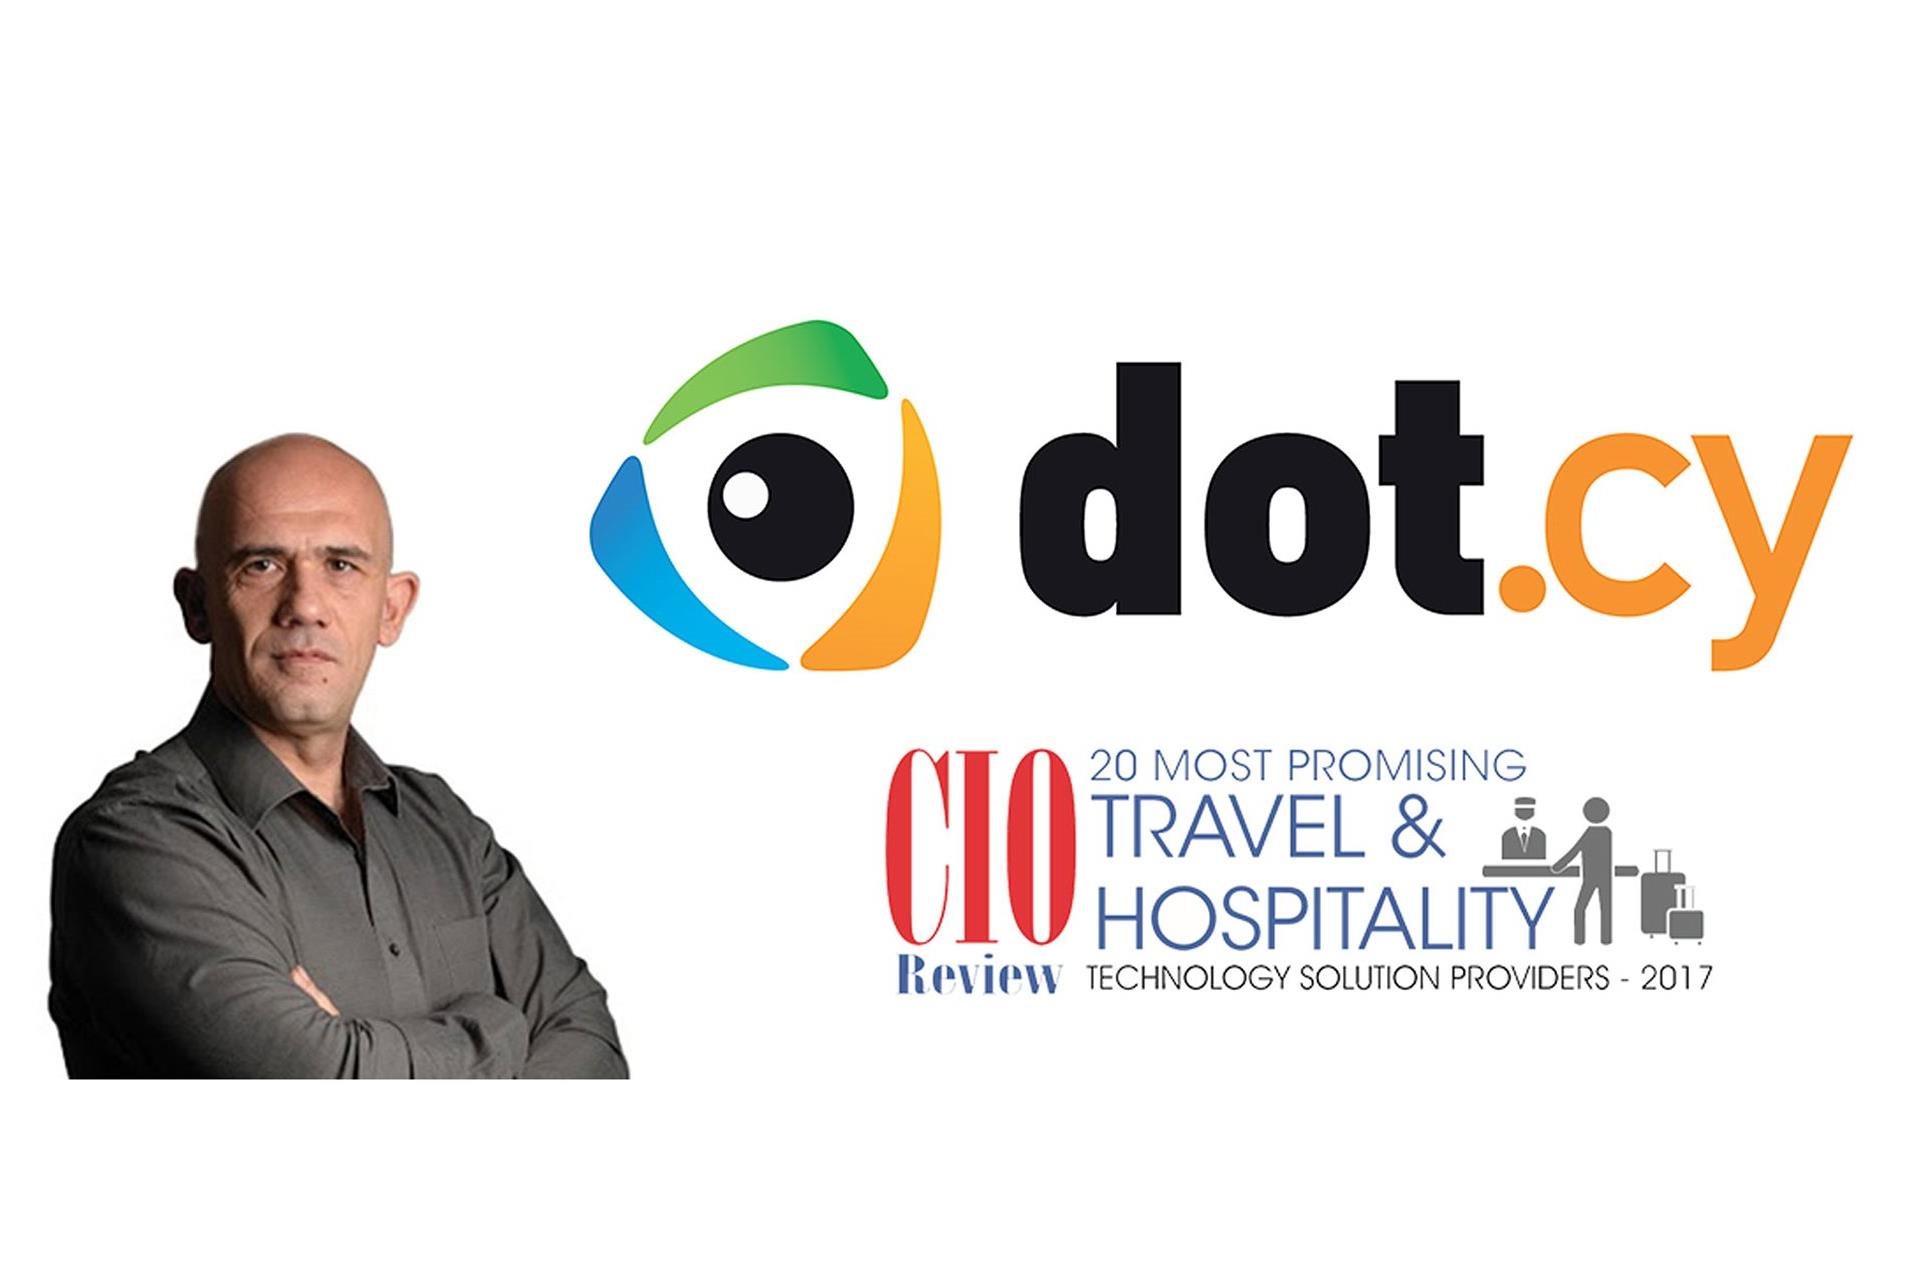 Dot.Cy ranked in global top 20 in Hospitality Providers for 2017